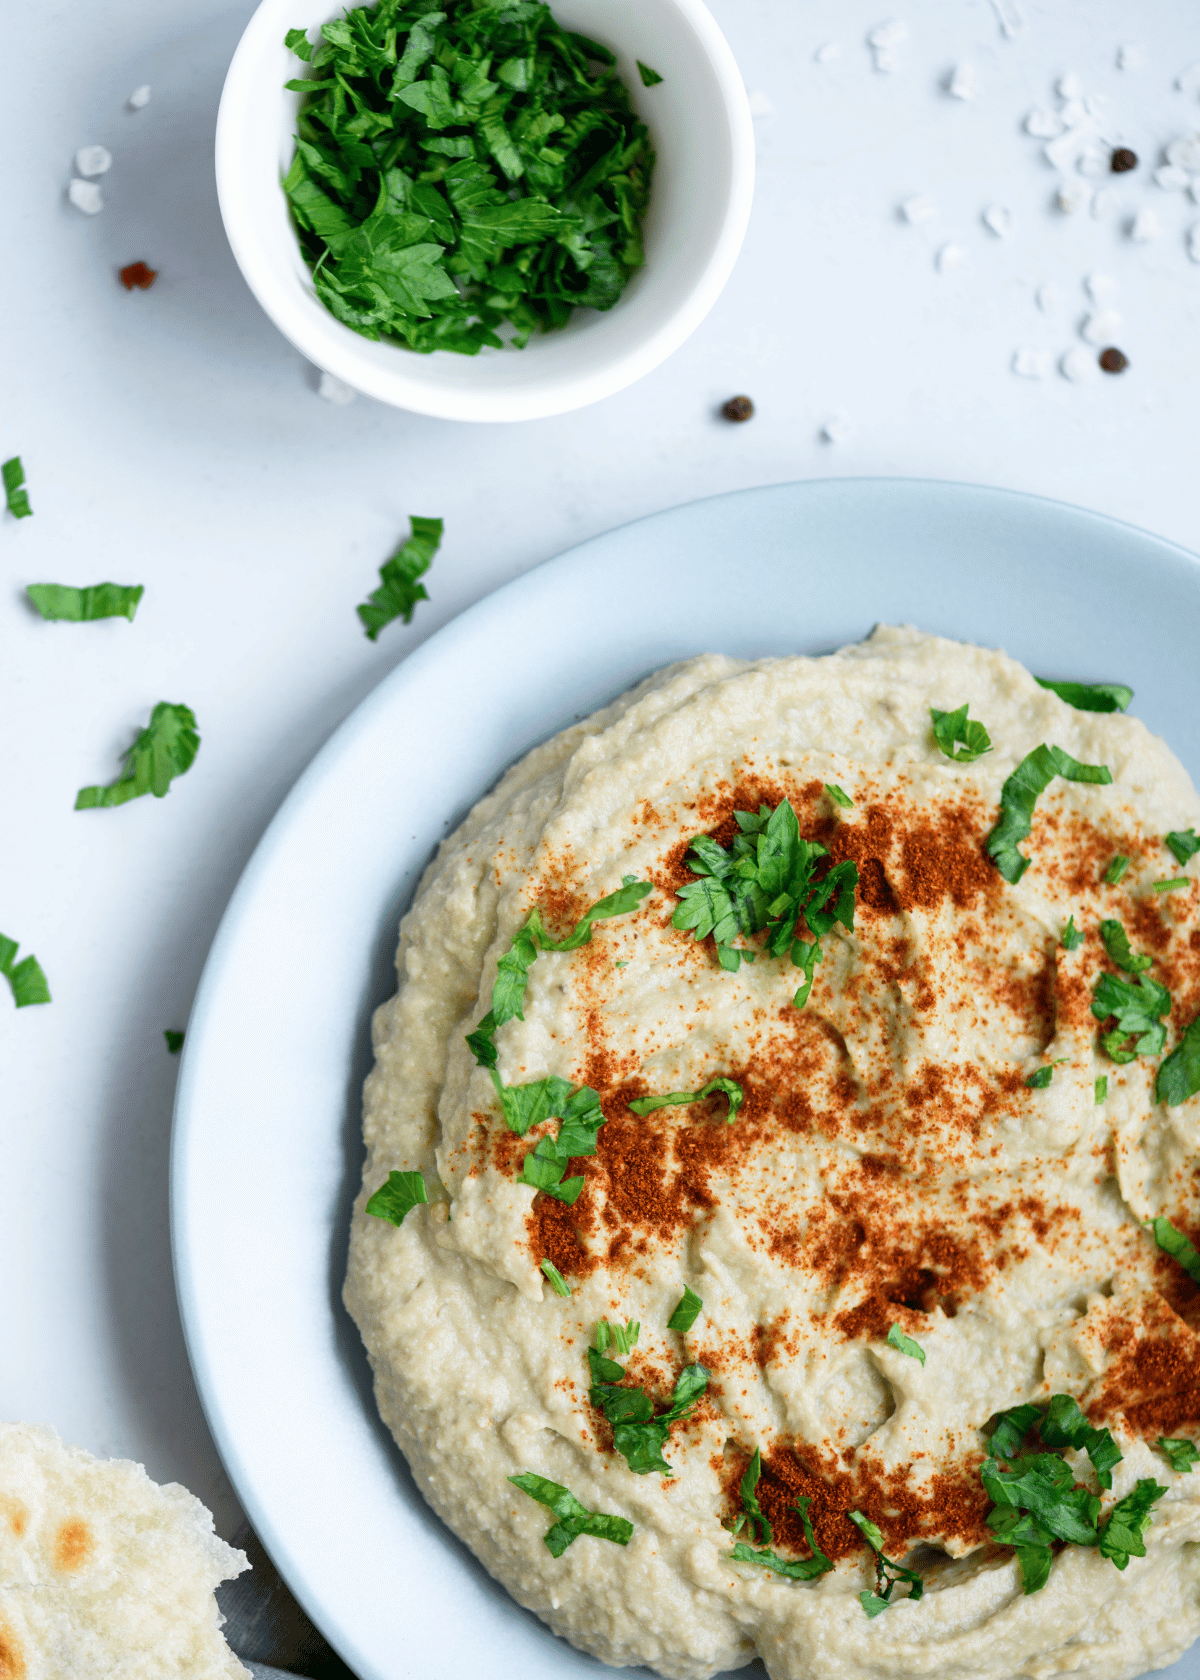 3 Delicious Eggplant Dips You Can Make at Home